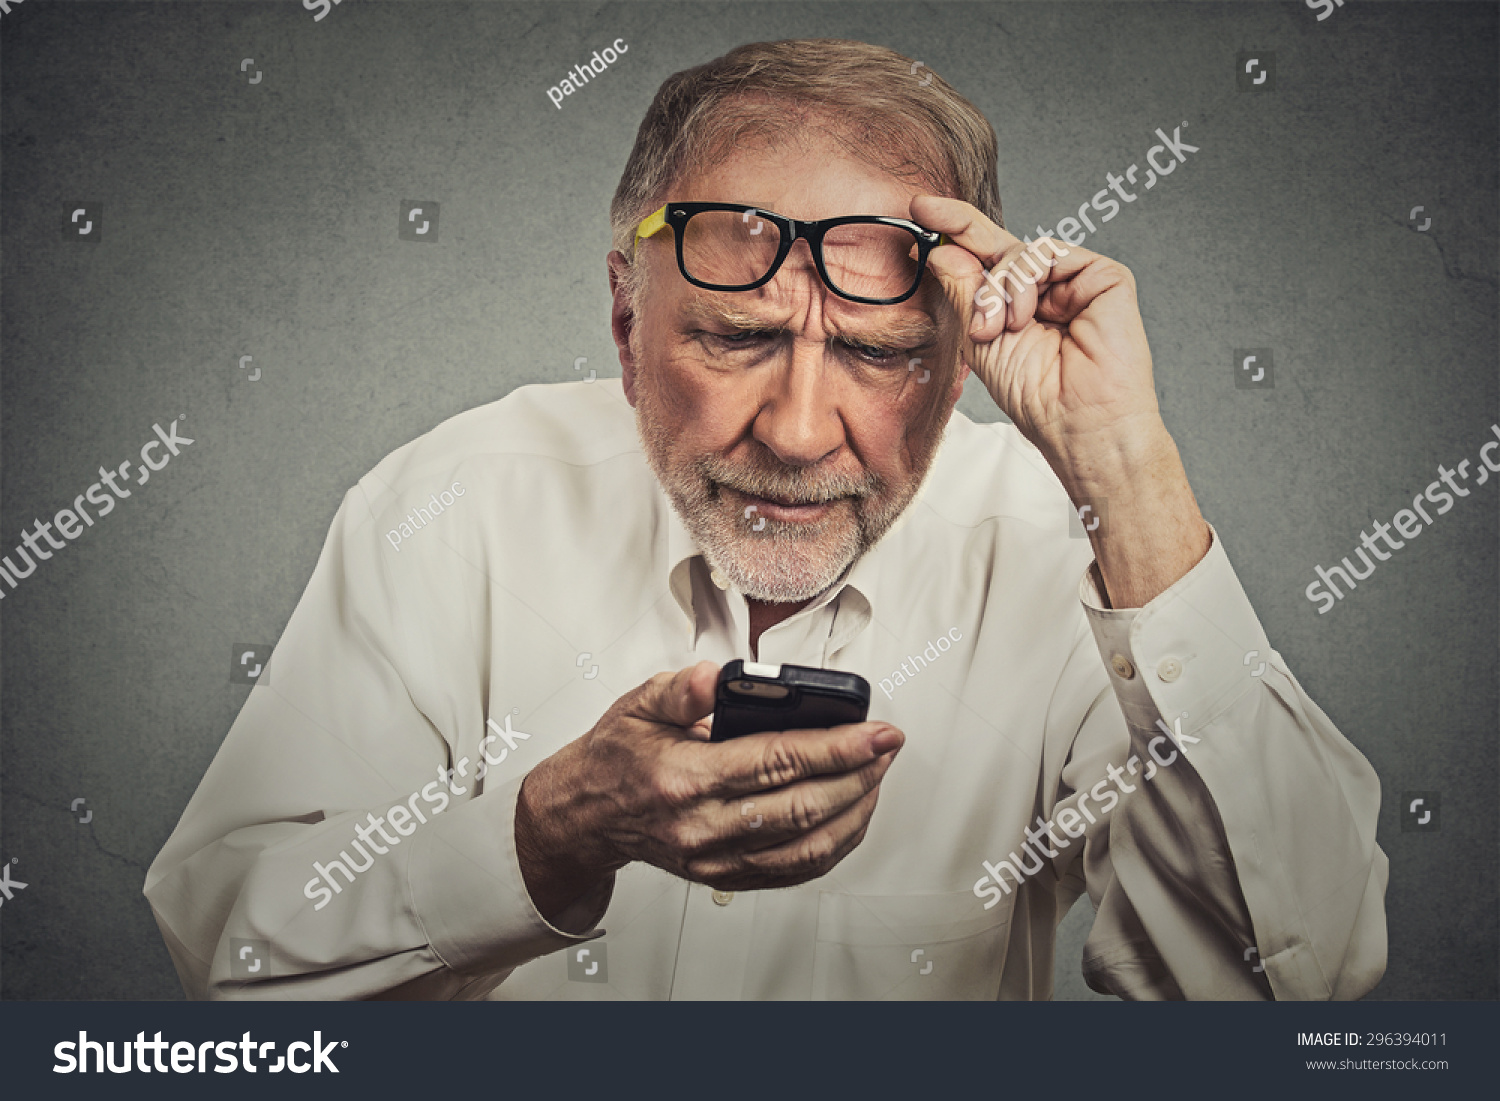 Closeup portrait headshot elderly man with glasses having trouble seeing cell phone has vision problems. Bad text message. Negative human emotion facial expression perception. Confusing technology #296394011